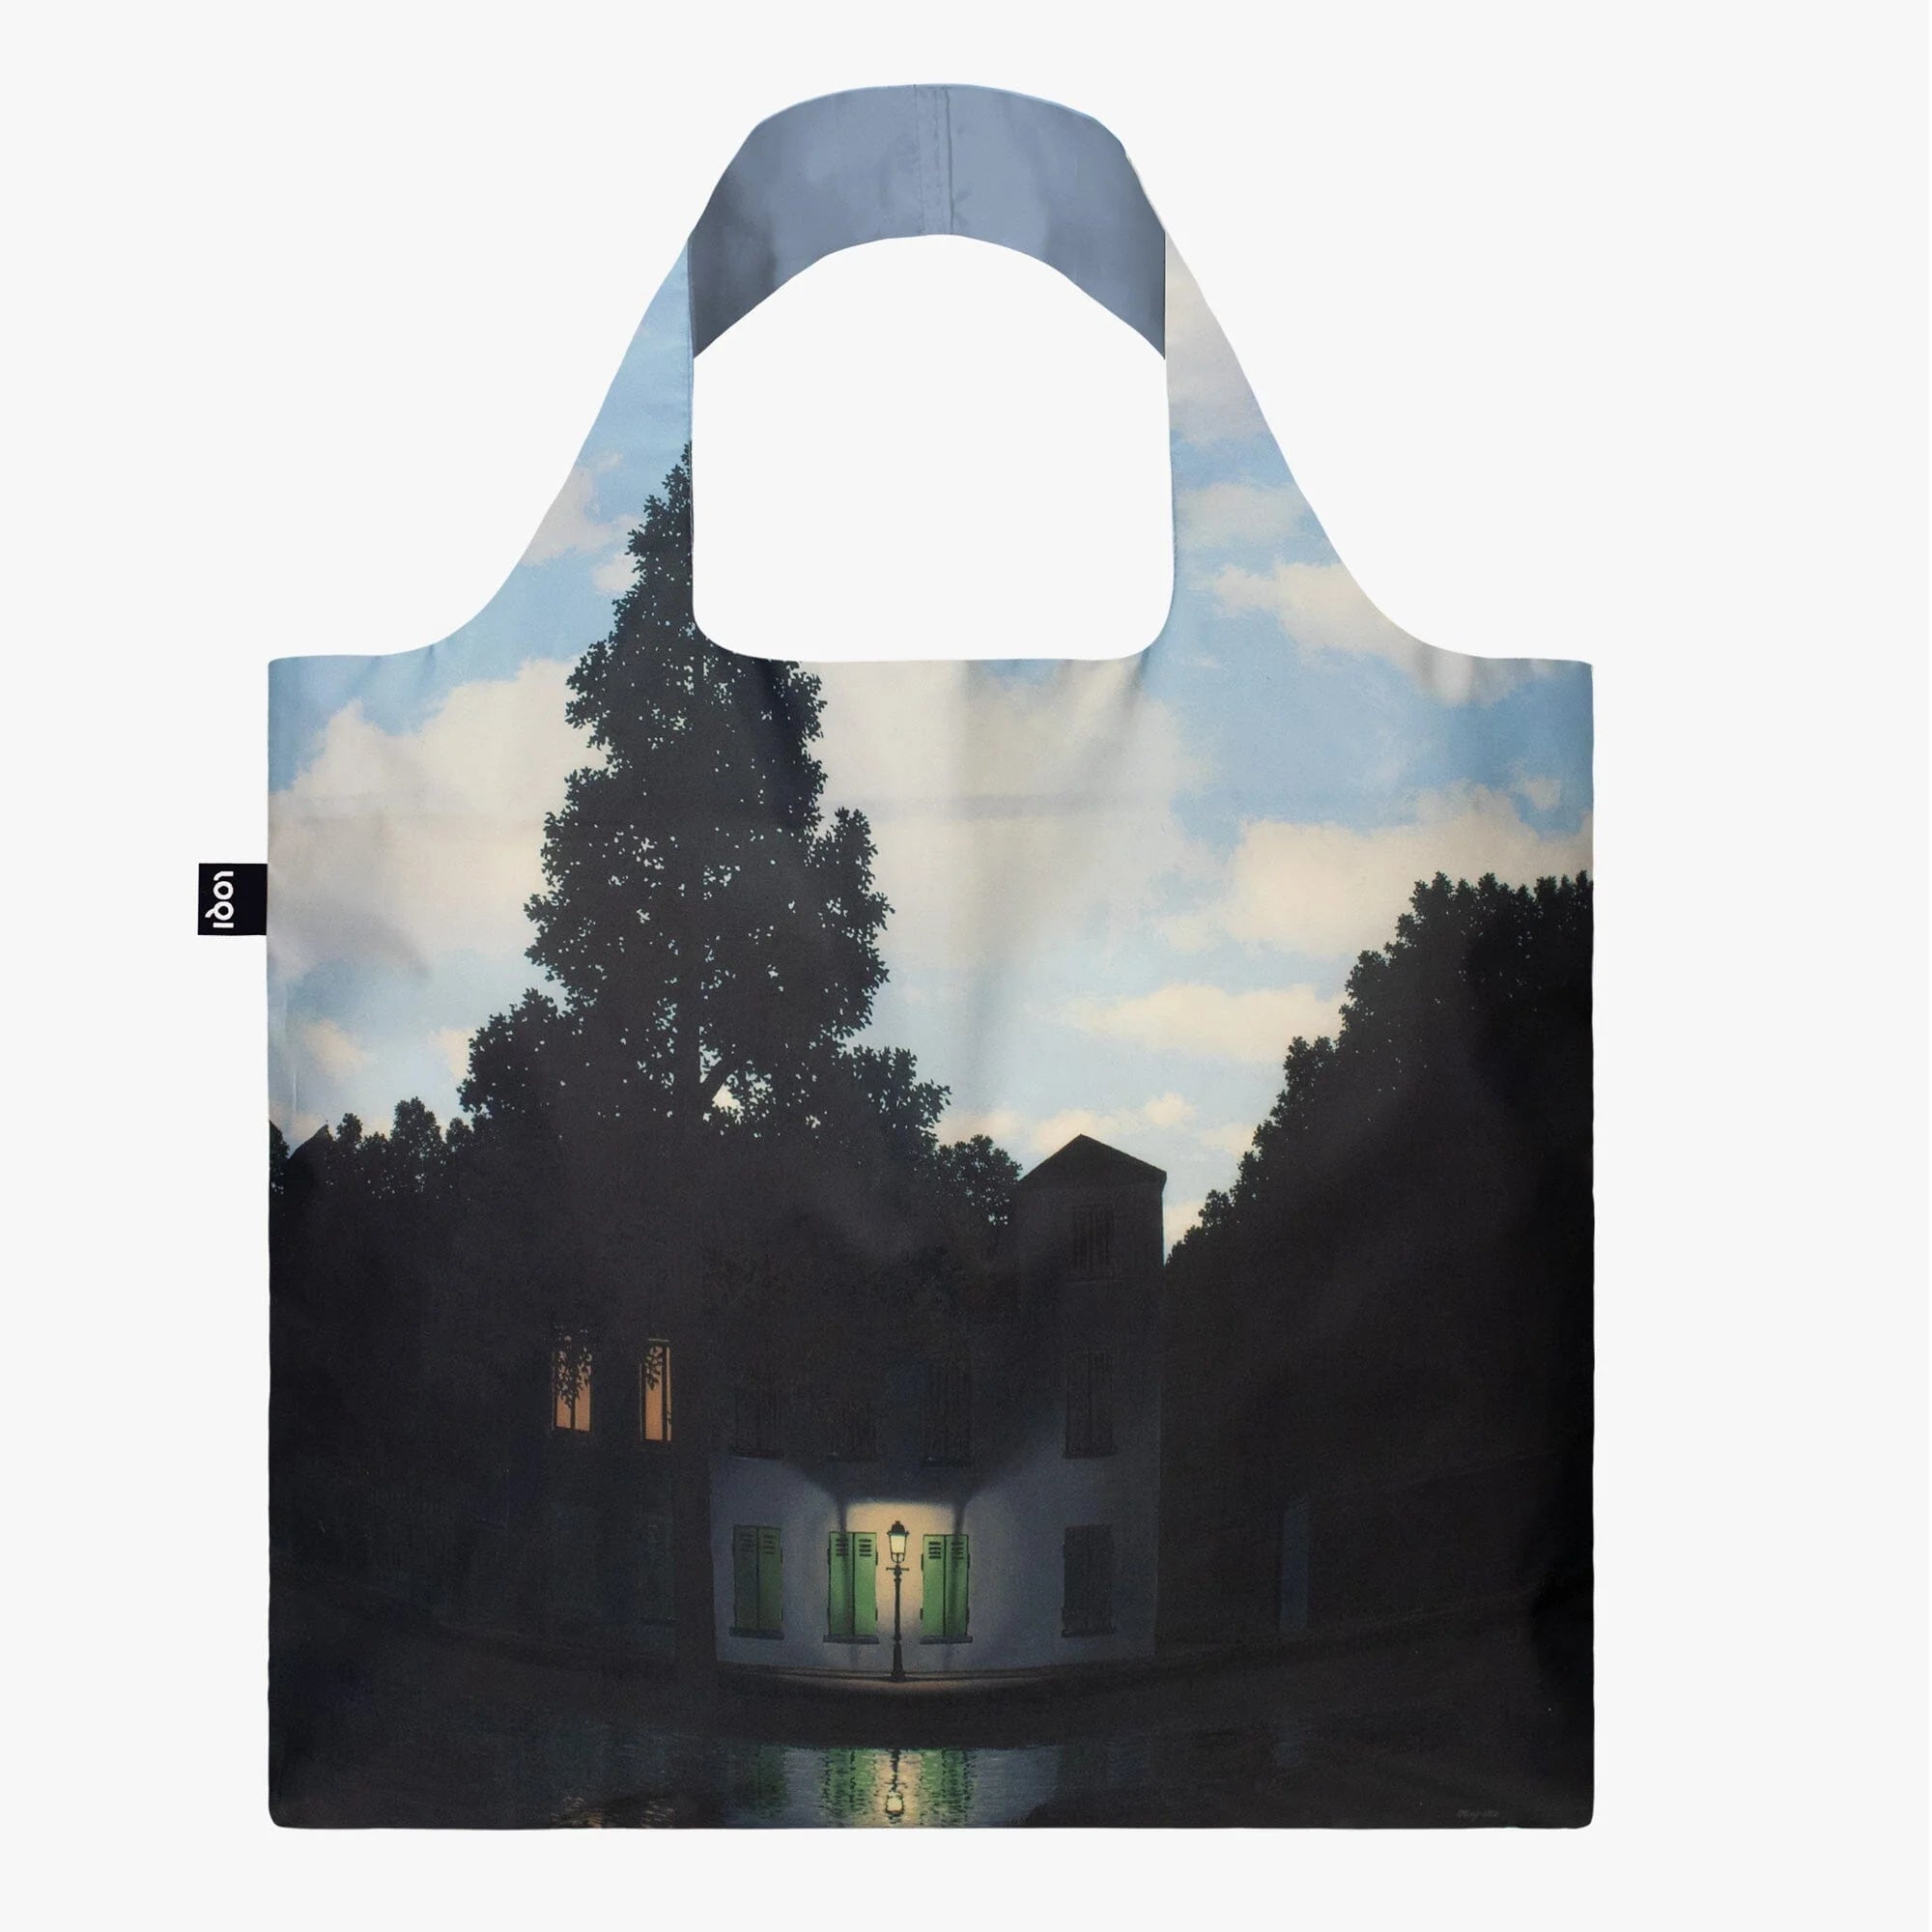 Sustainable Living Loqi Renet Magritte Images Recycled Bag by Weirs of Baggot Street